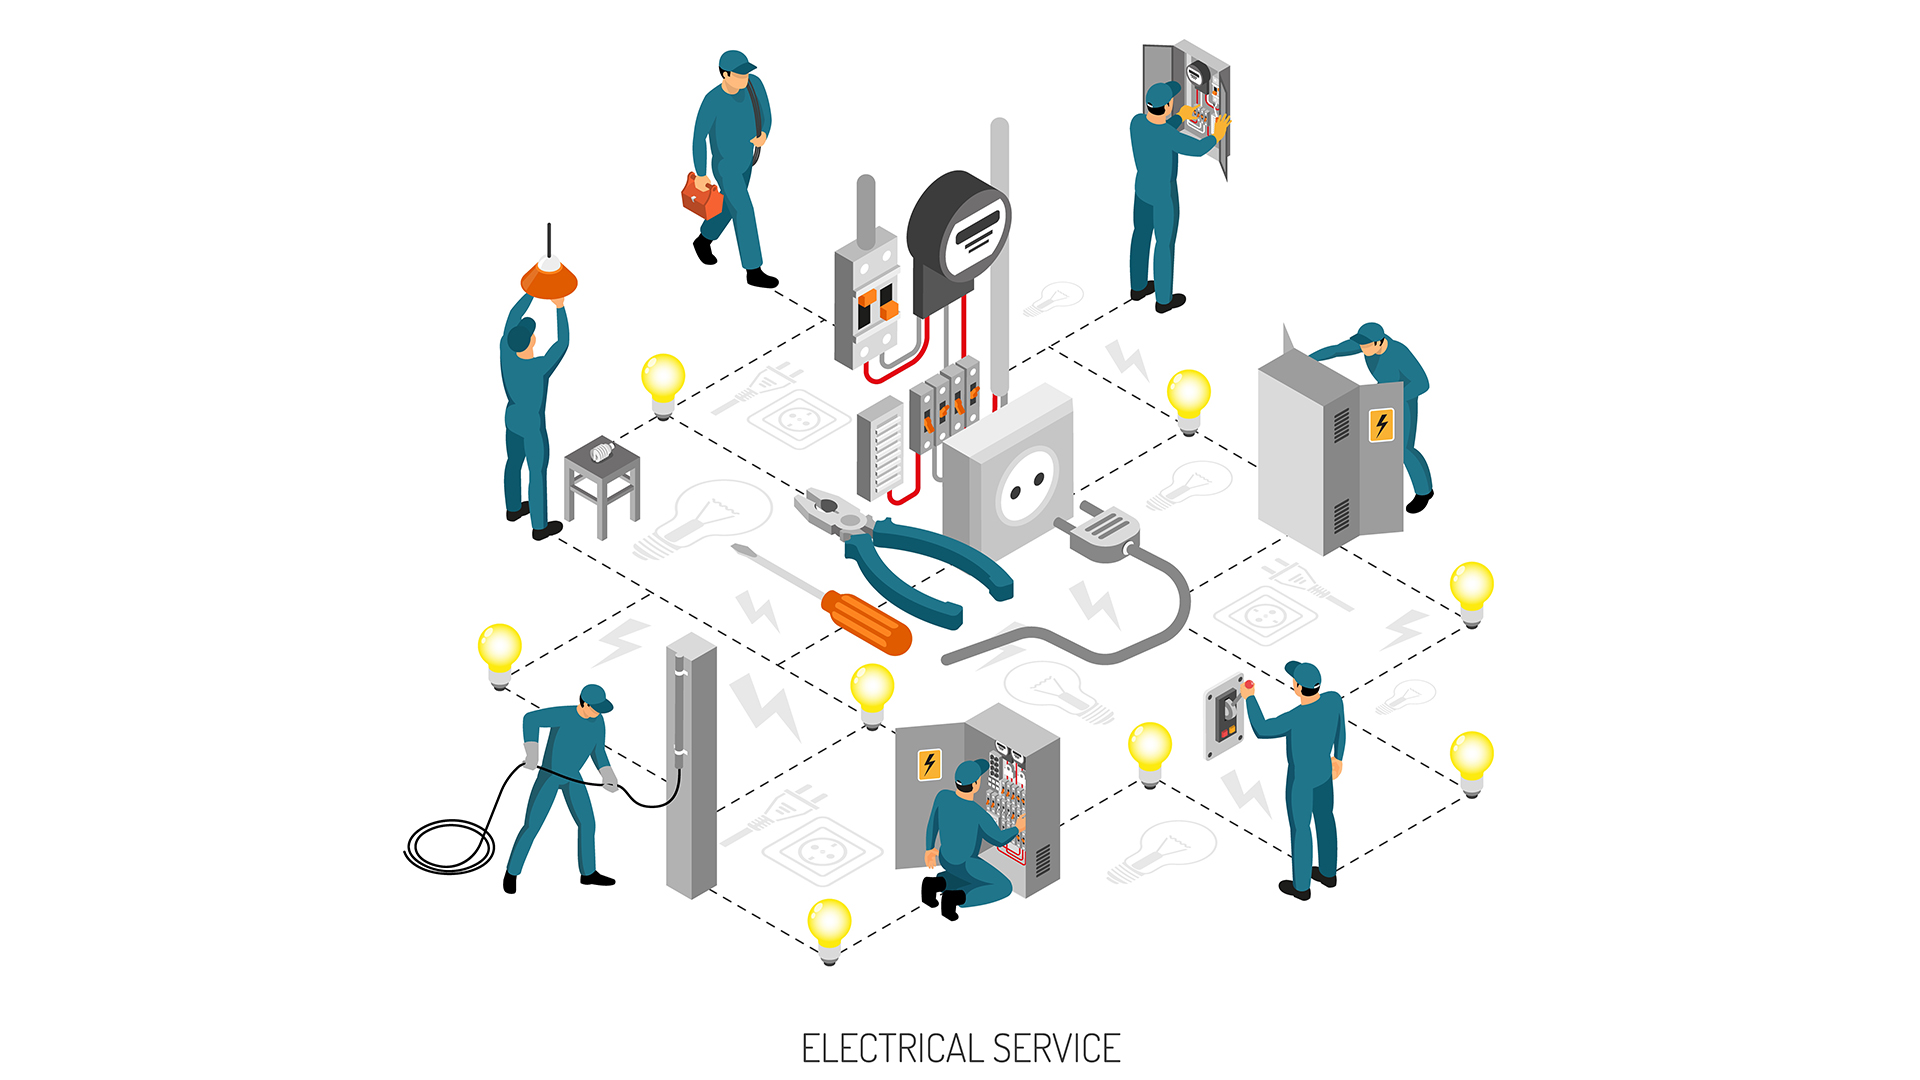 Electrical Power System Maintenance & Troubleshooting